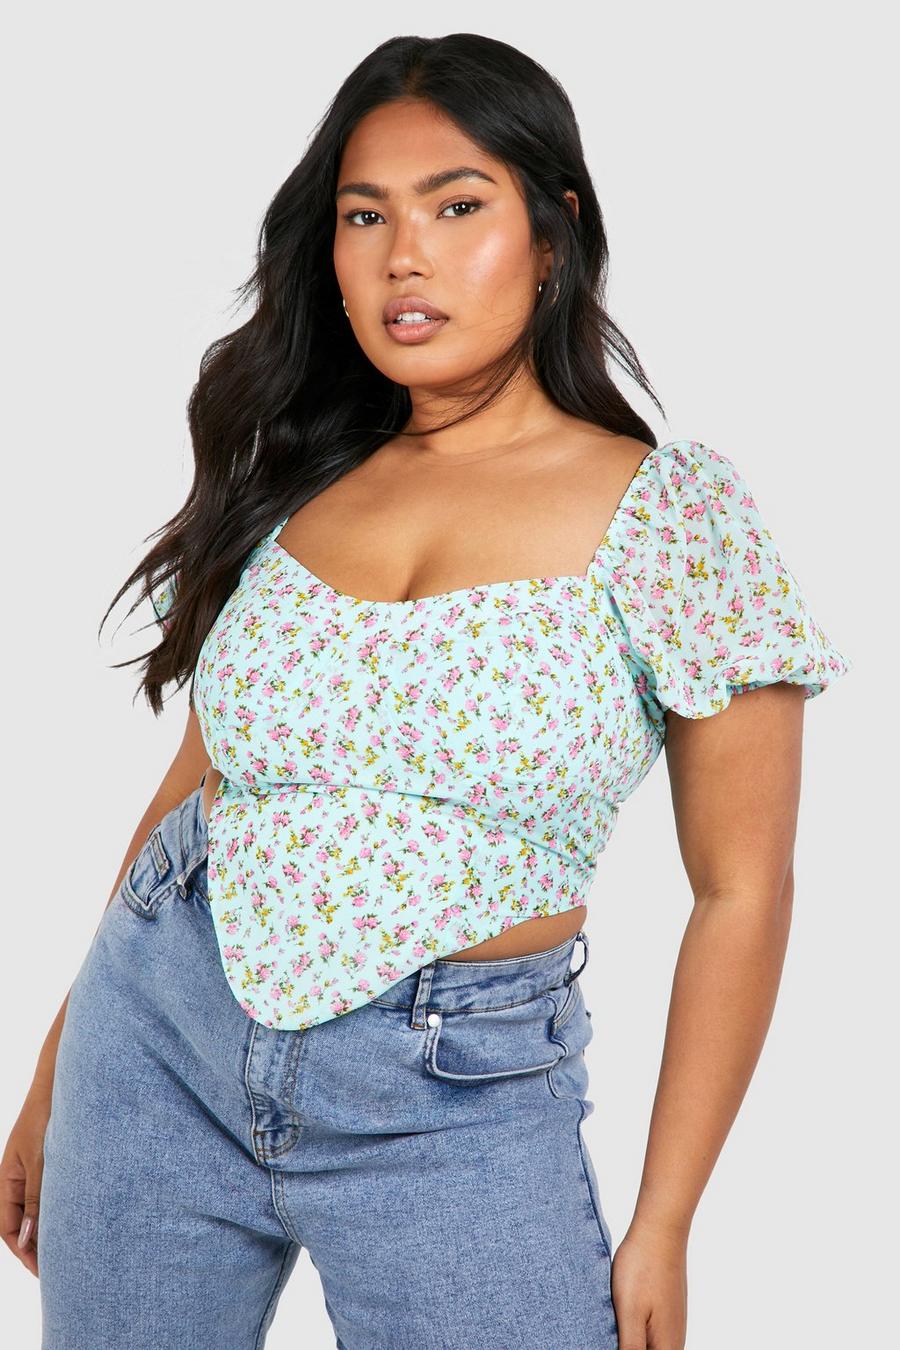 big bust approved going out tops! 👀🍸 #personalstyle #outfitinspo #un